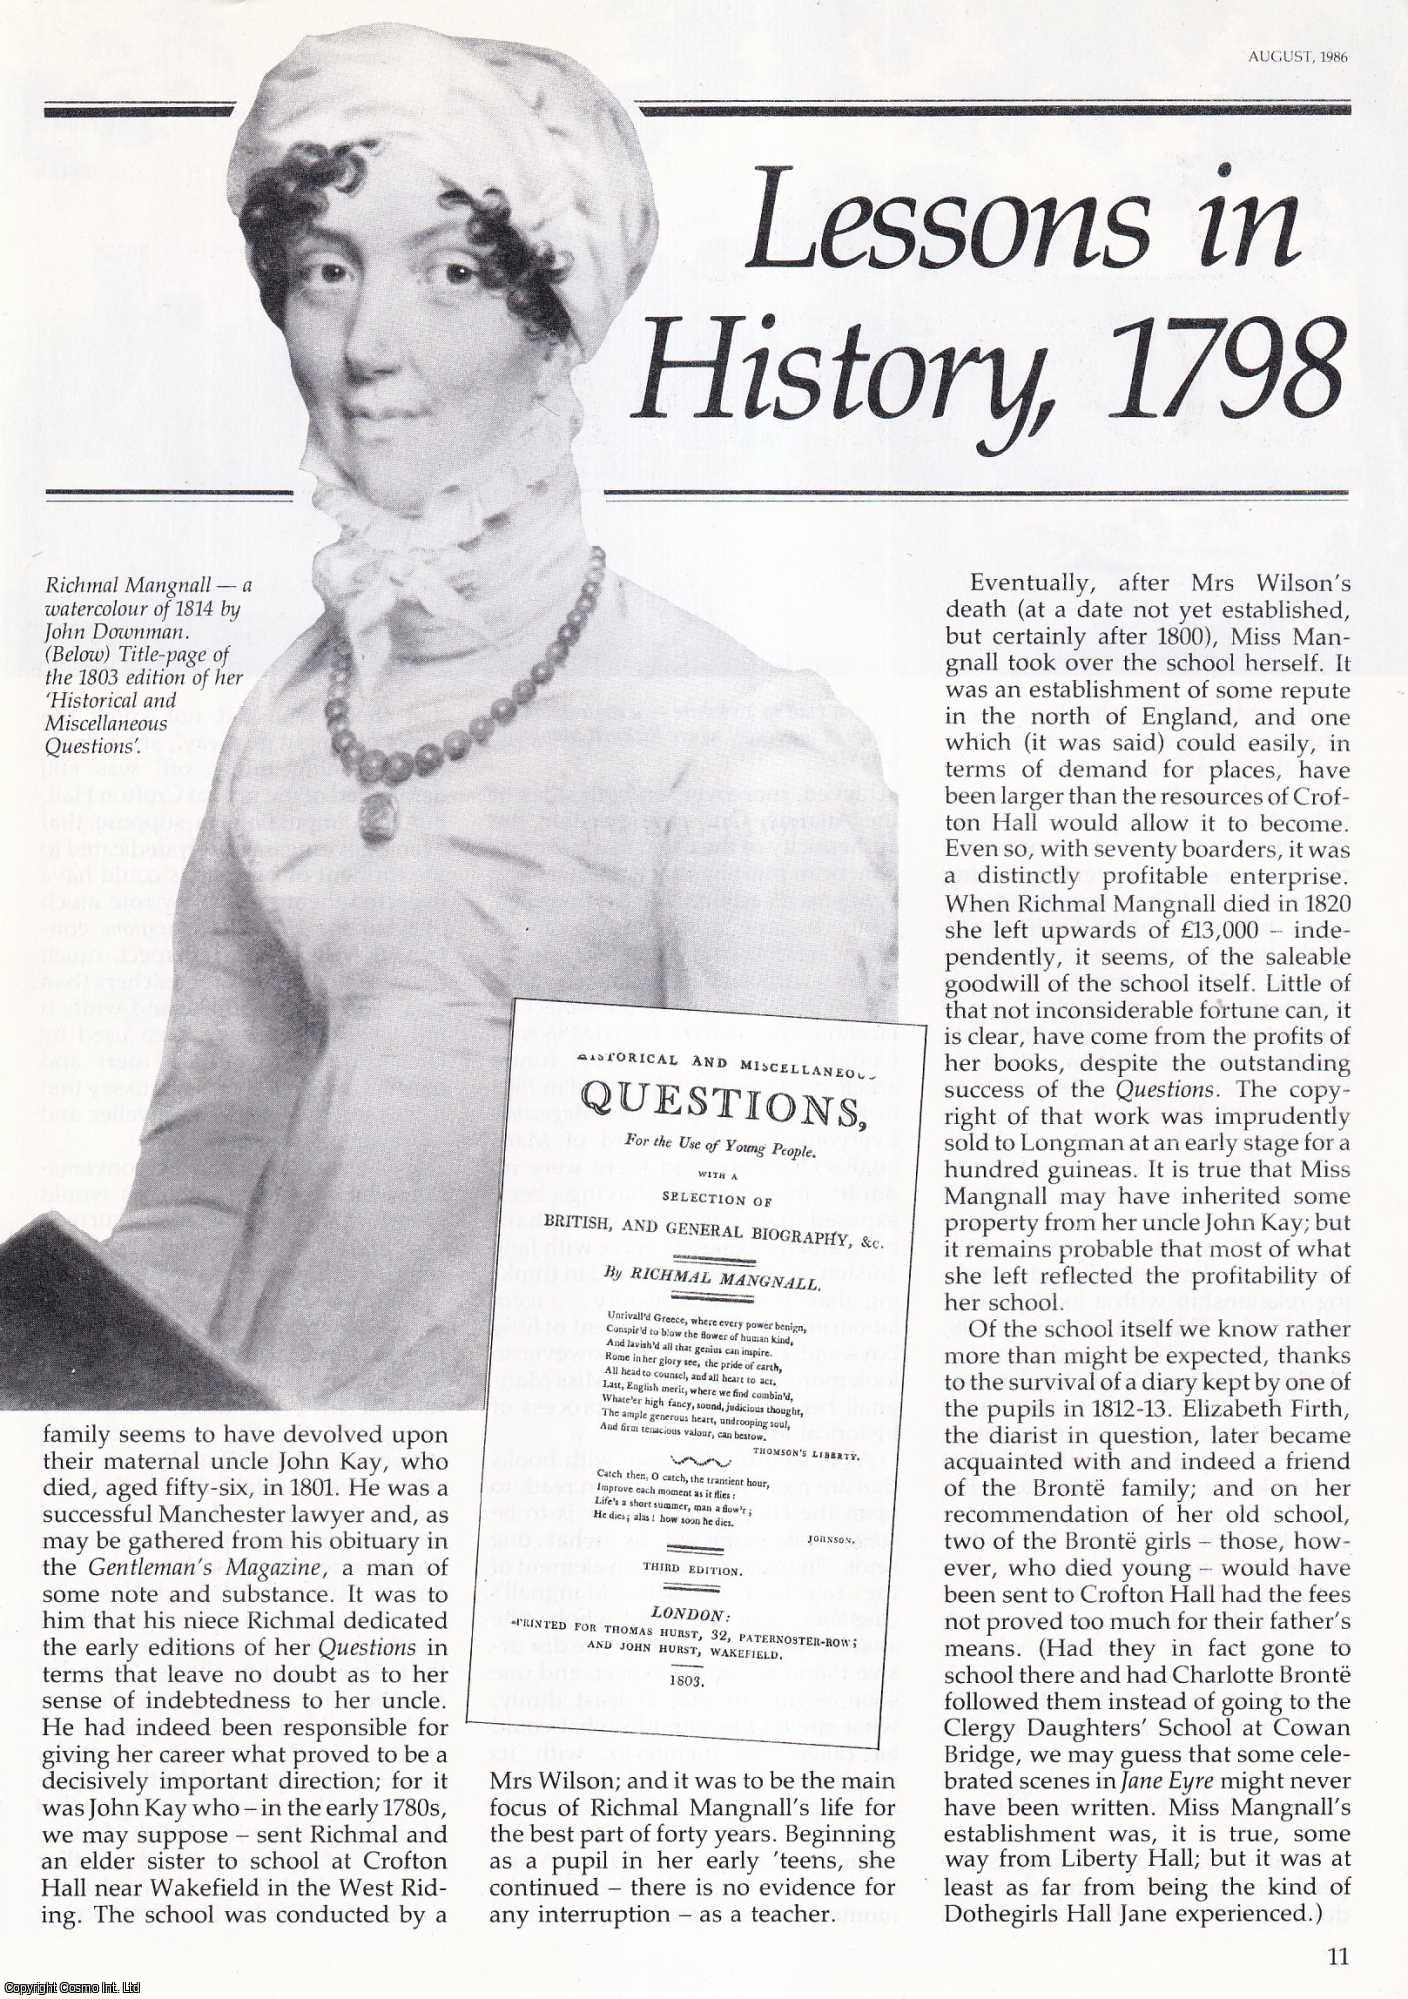 J.H. Burns - Clio as a Governess: Lessons in History, 1798. An original article from History Today, 1986.